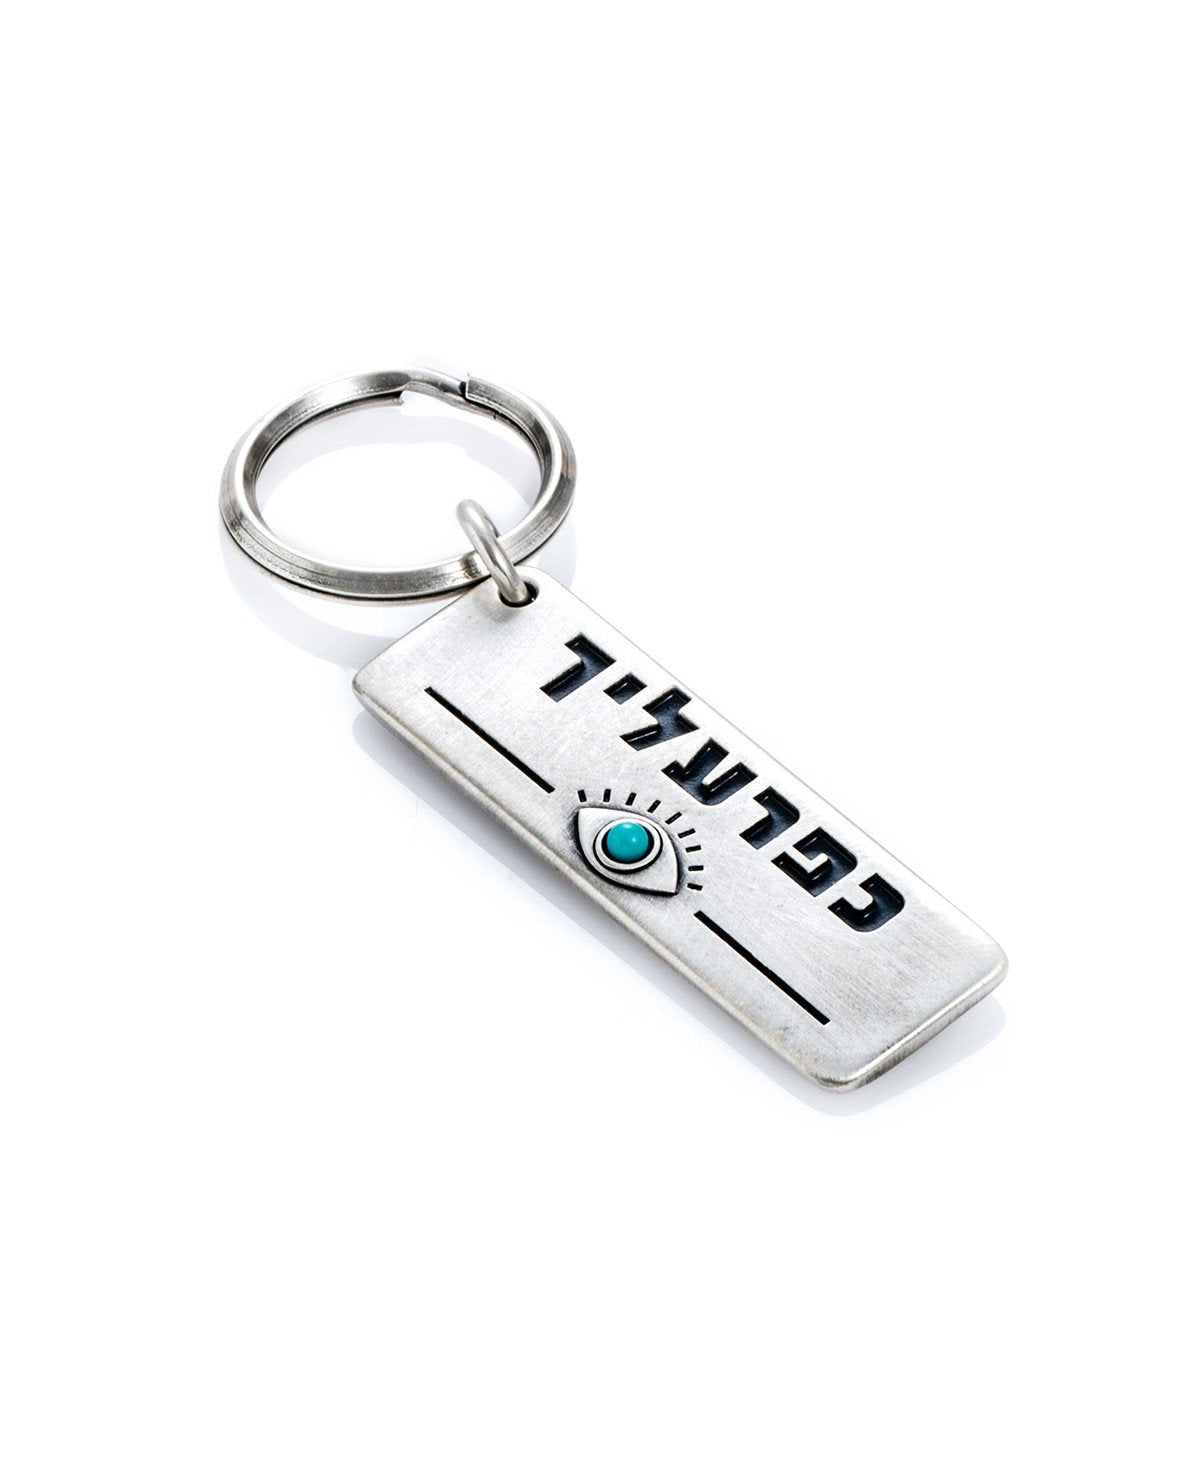 A whimsical keychain that is based on a local slang expression (a common term of endearment in Hebrew).
The keychain is designed as a rectangular plate with the words "Kapara On You" written on one side. Beneath is an embossed eye inlaid with a beautiful turquoise stone. Along the other side of the plate is an impressive and artistic graphic decoration.
The keychain is coated in sterling silver and is strong and reliable.
A gift that is fun to give, along with a big hug, to anyone we want to make sure they 